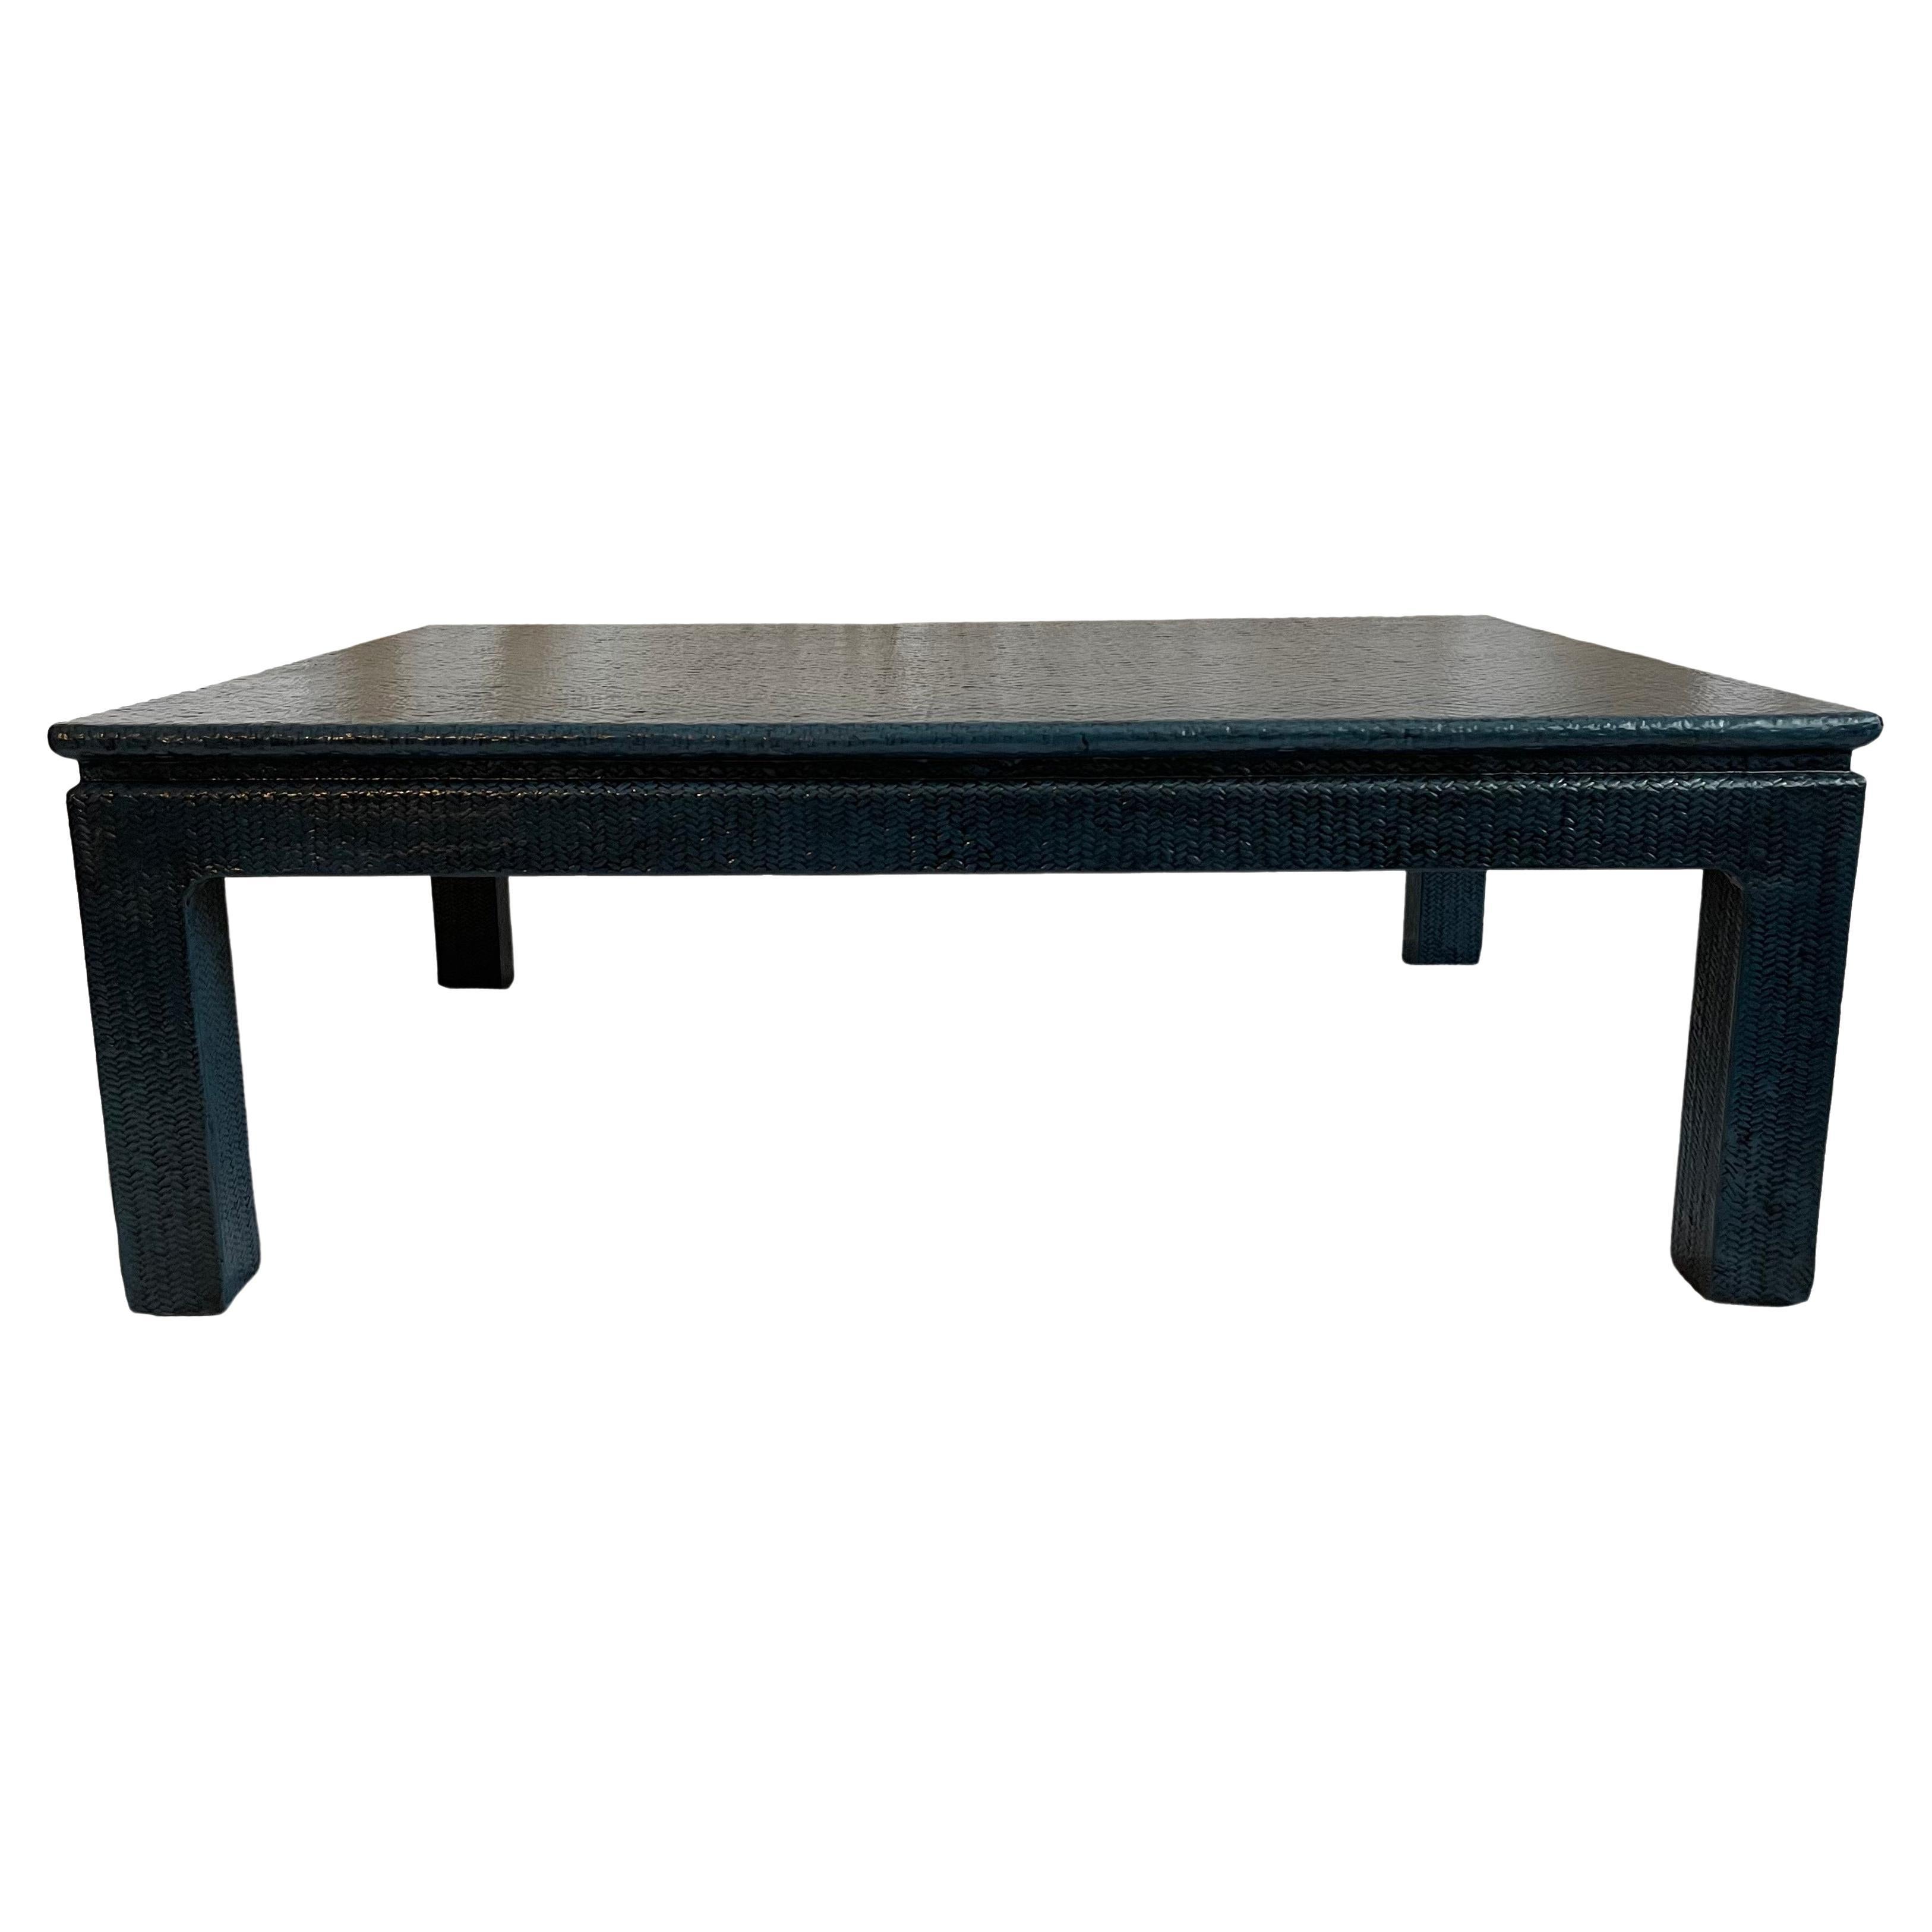 1970s Grasscloth Dark Blue Painted Large Cocktail Table For Sale